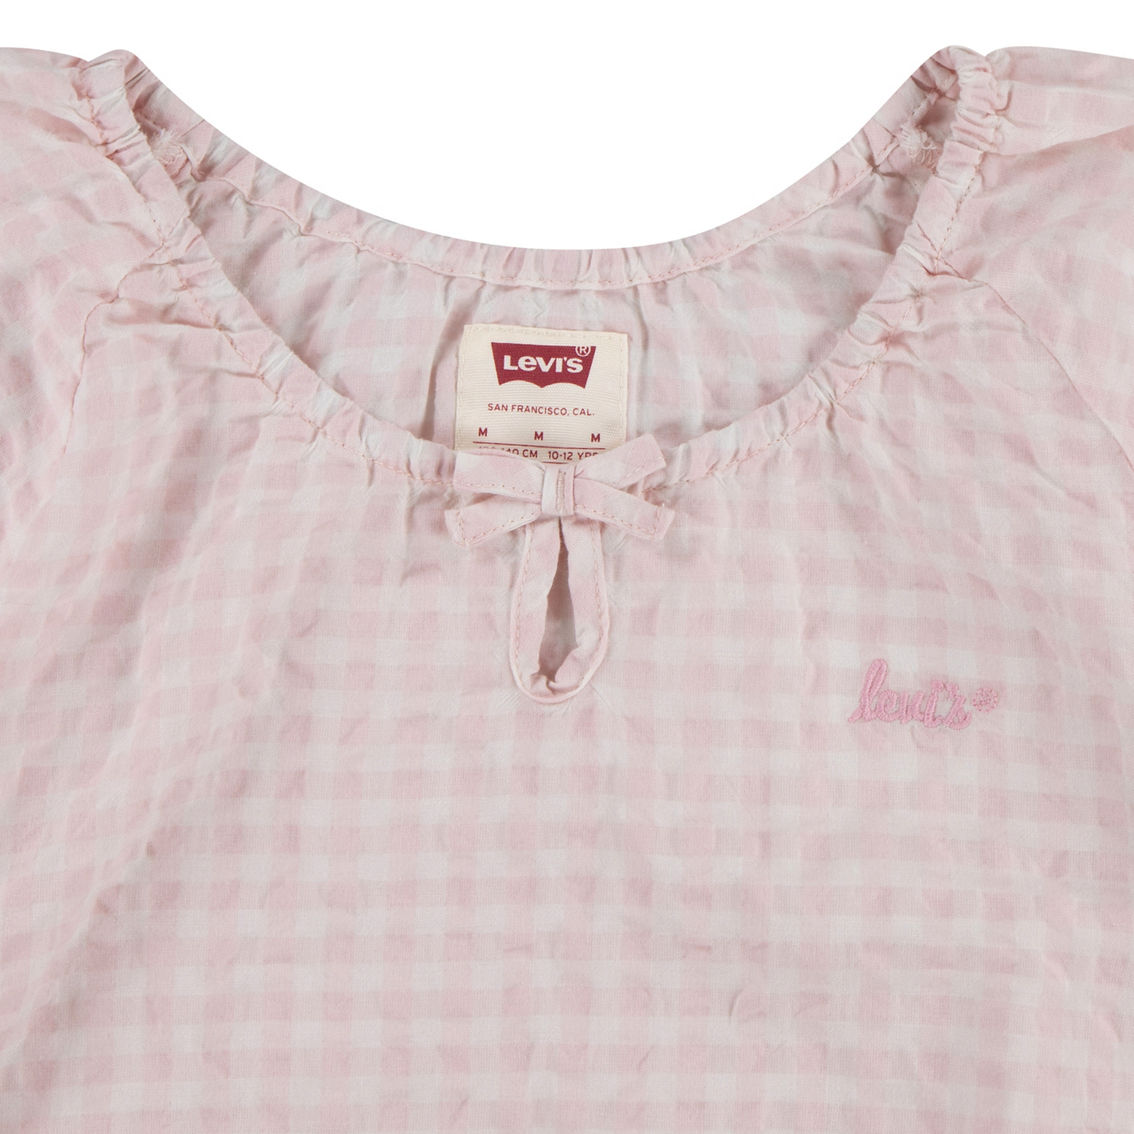 Levi's Girls Gingham Peasant Blouse - Image 3 of 3